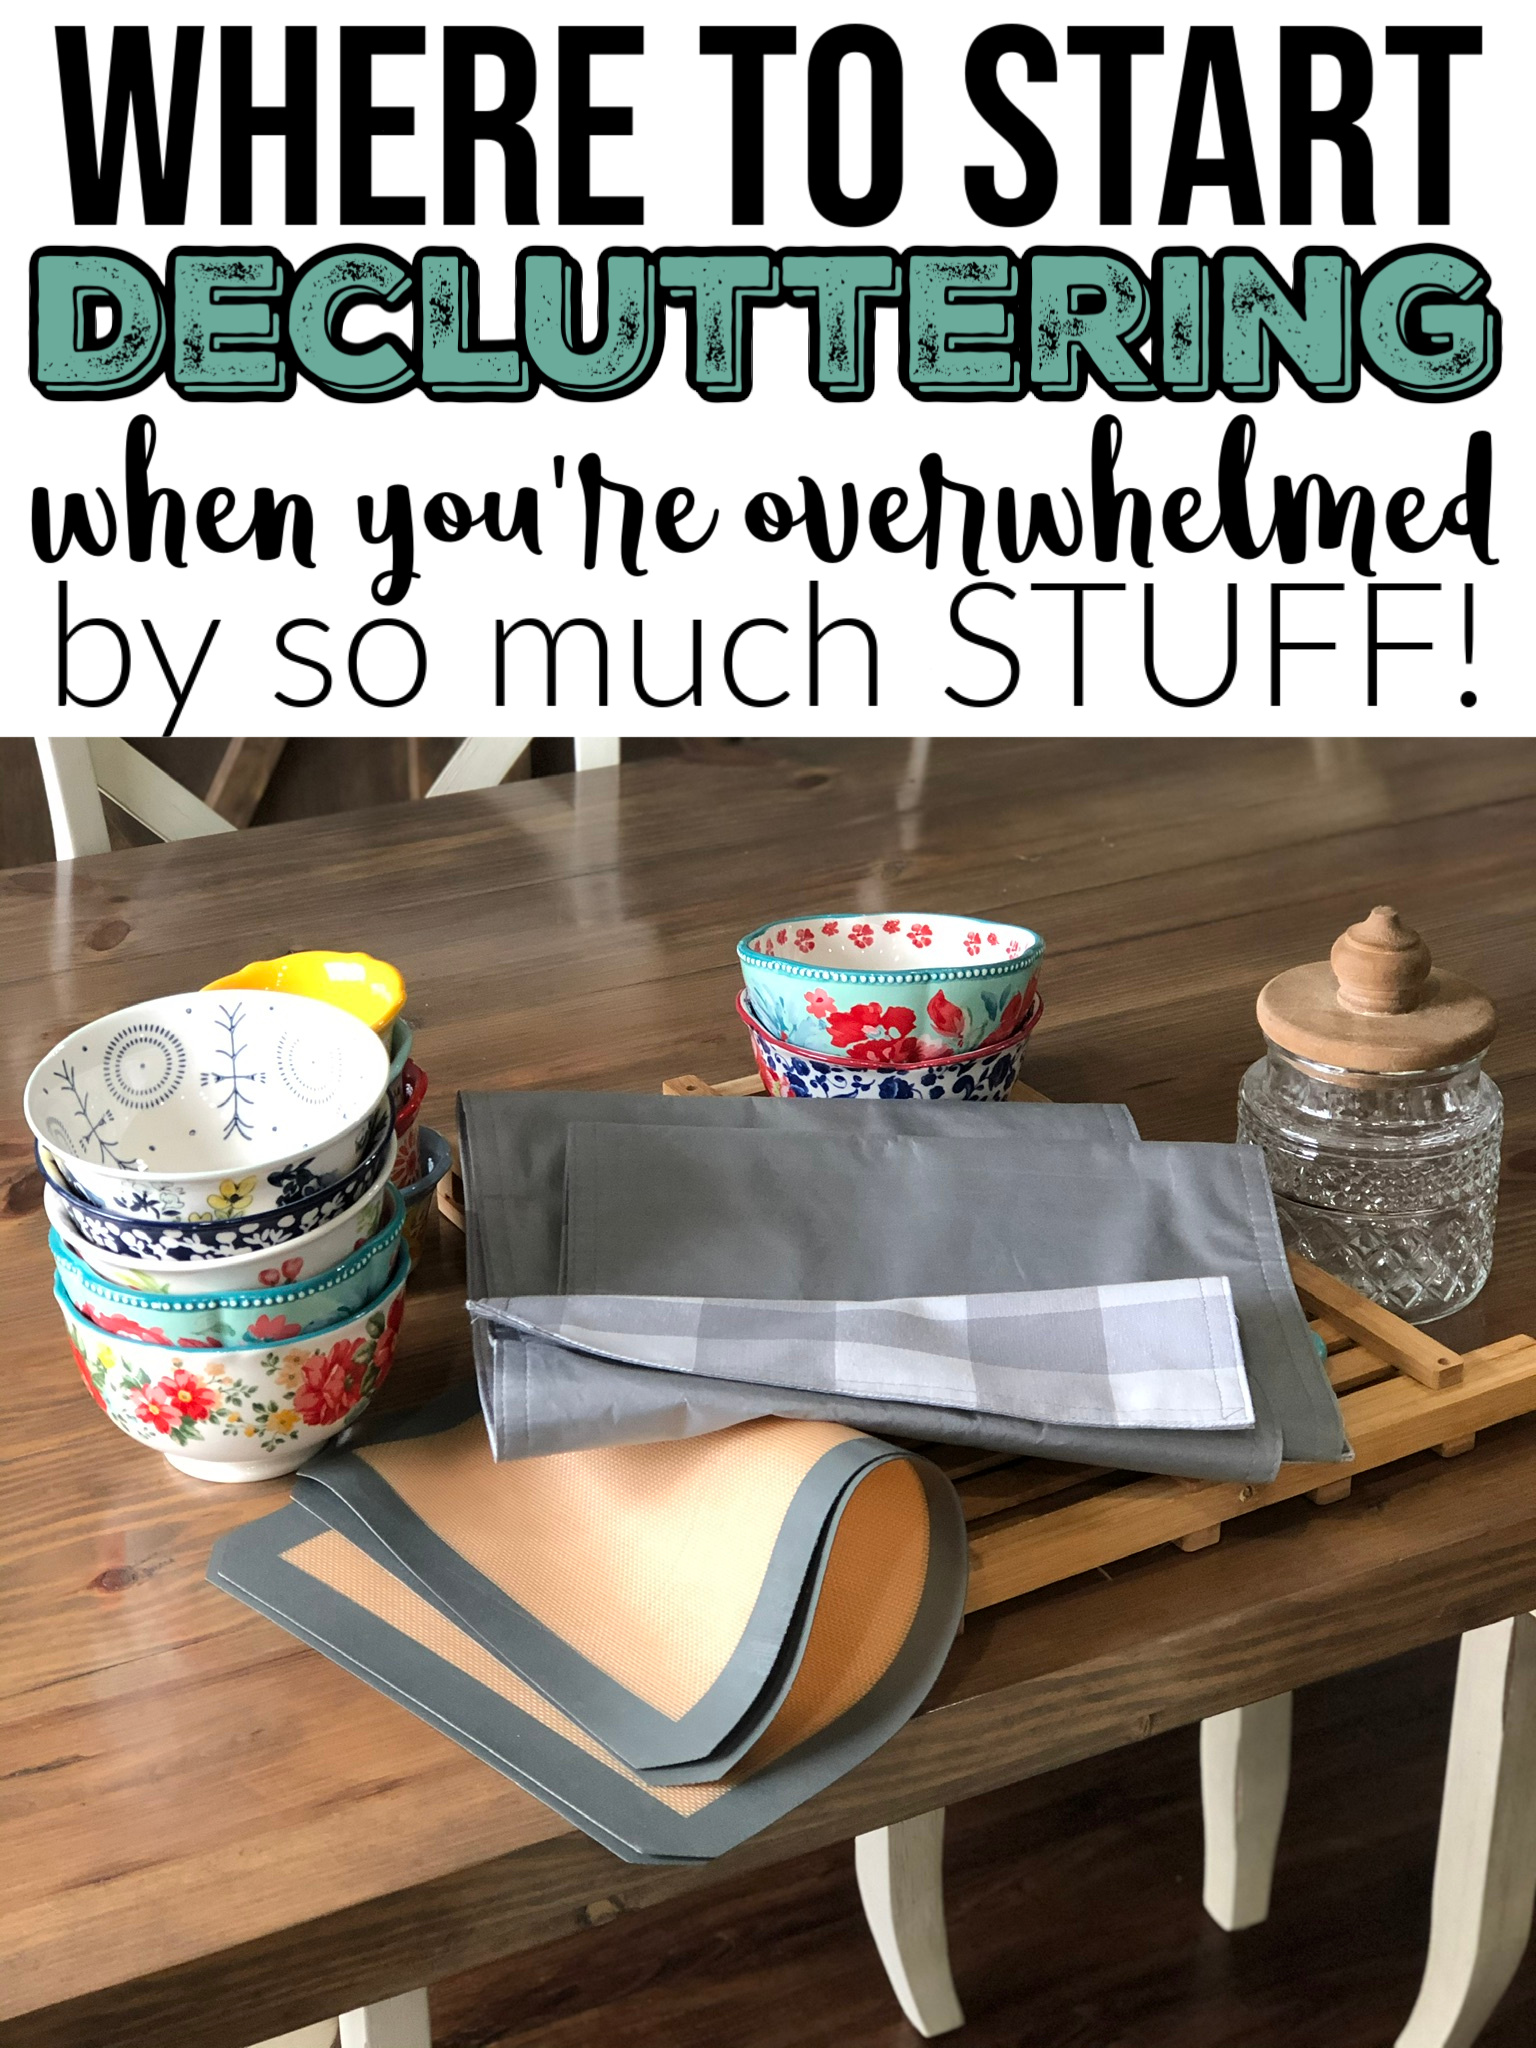 Where to Start Decluttering When You Feel Overwhelmed